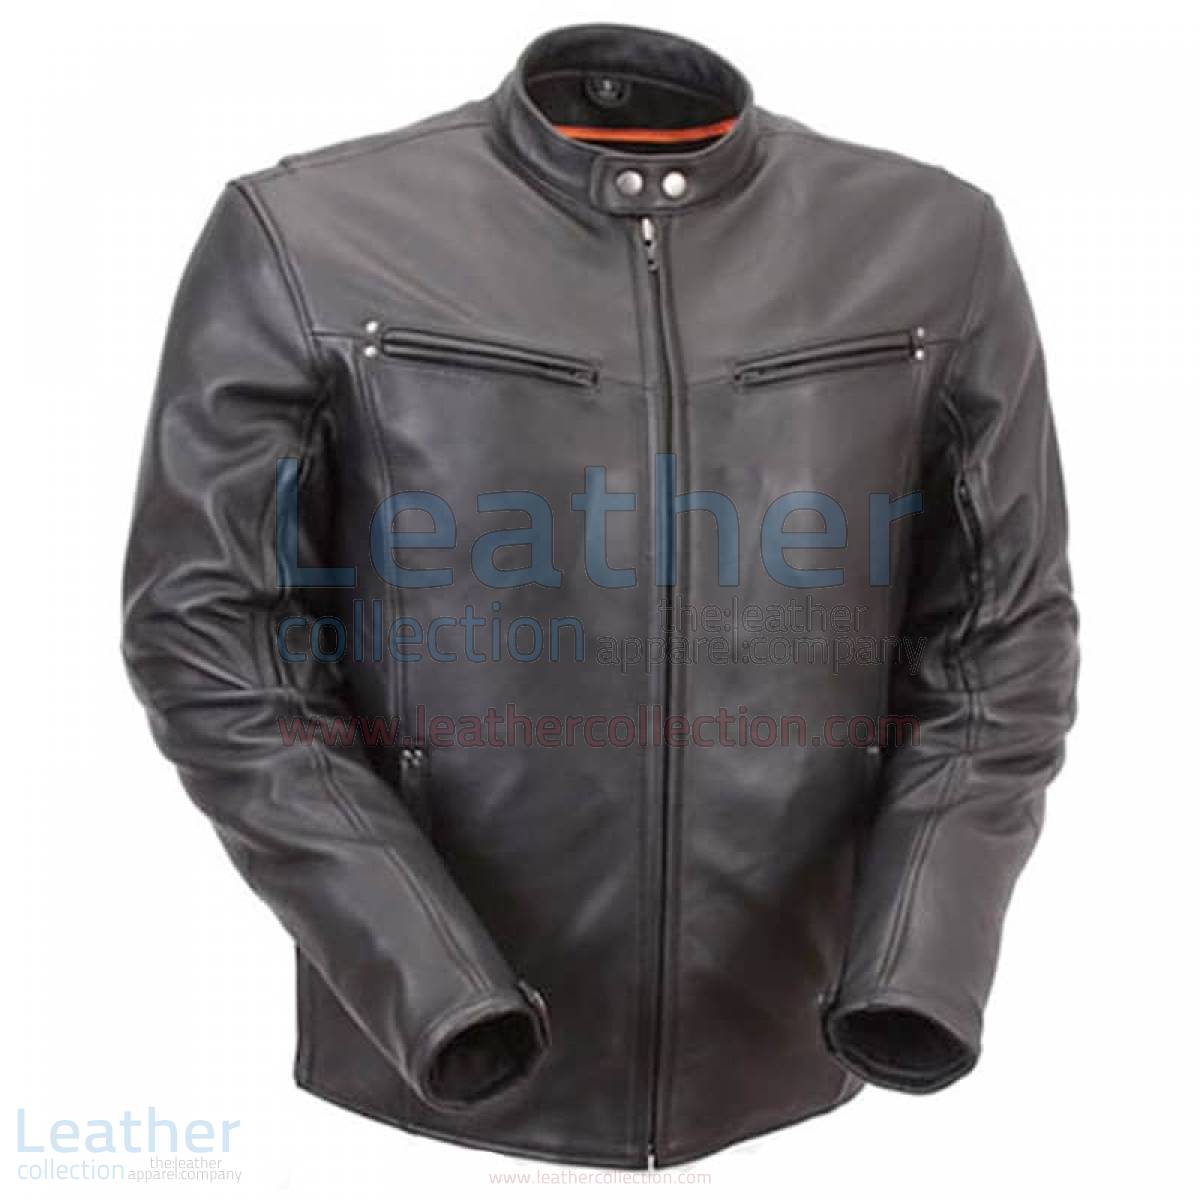 Premium Leather Rider Jacket with Multiple Vents –  Jacket